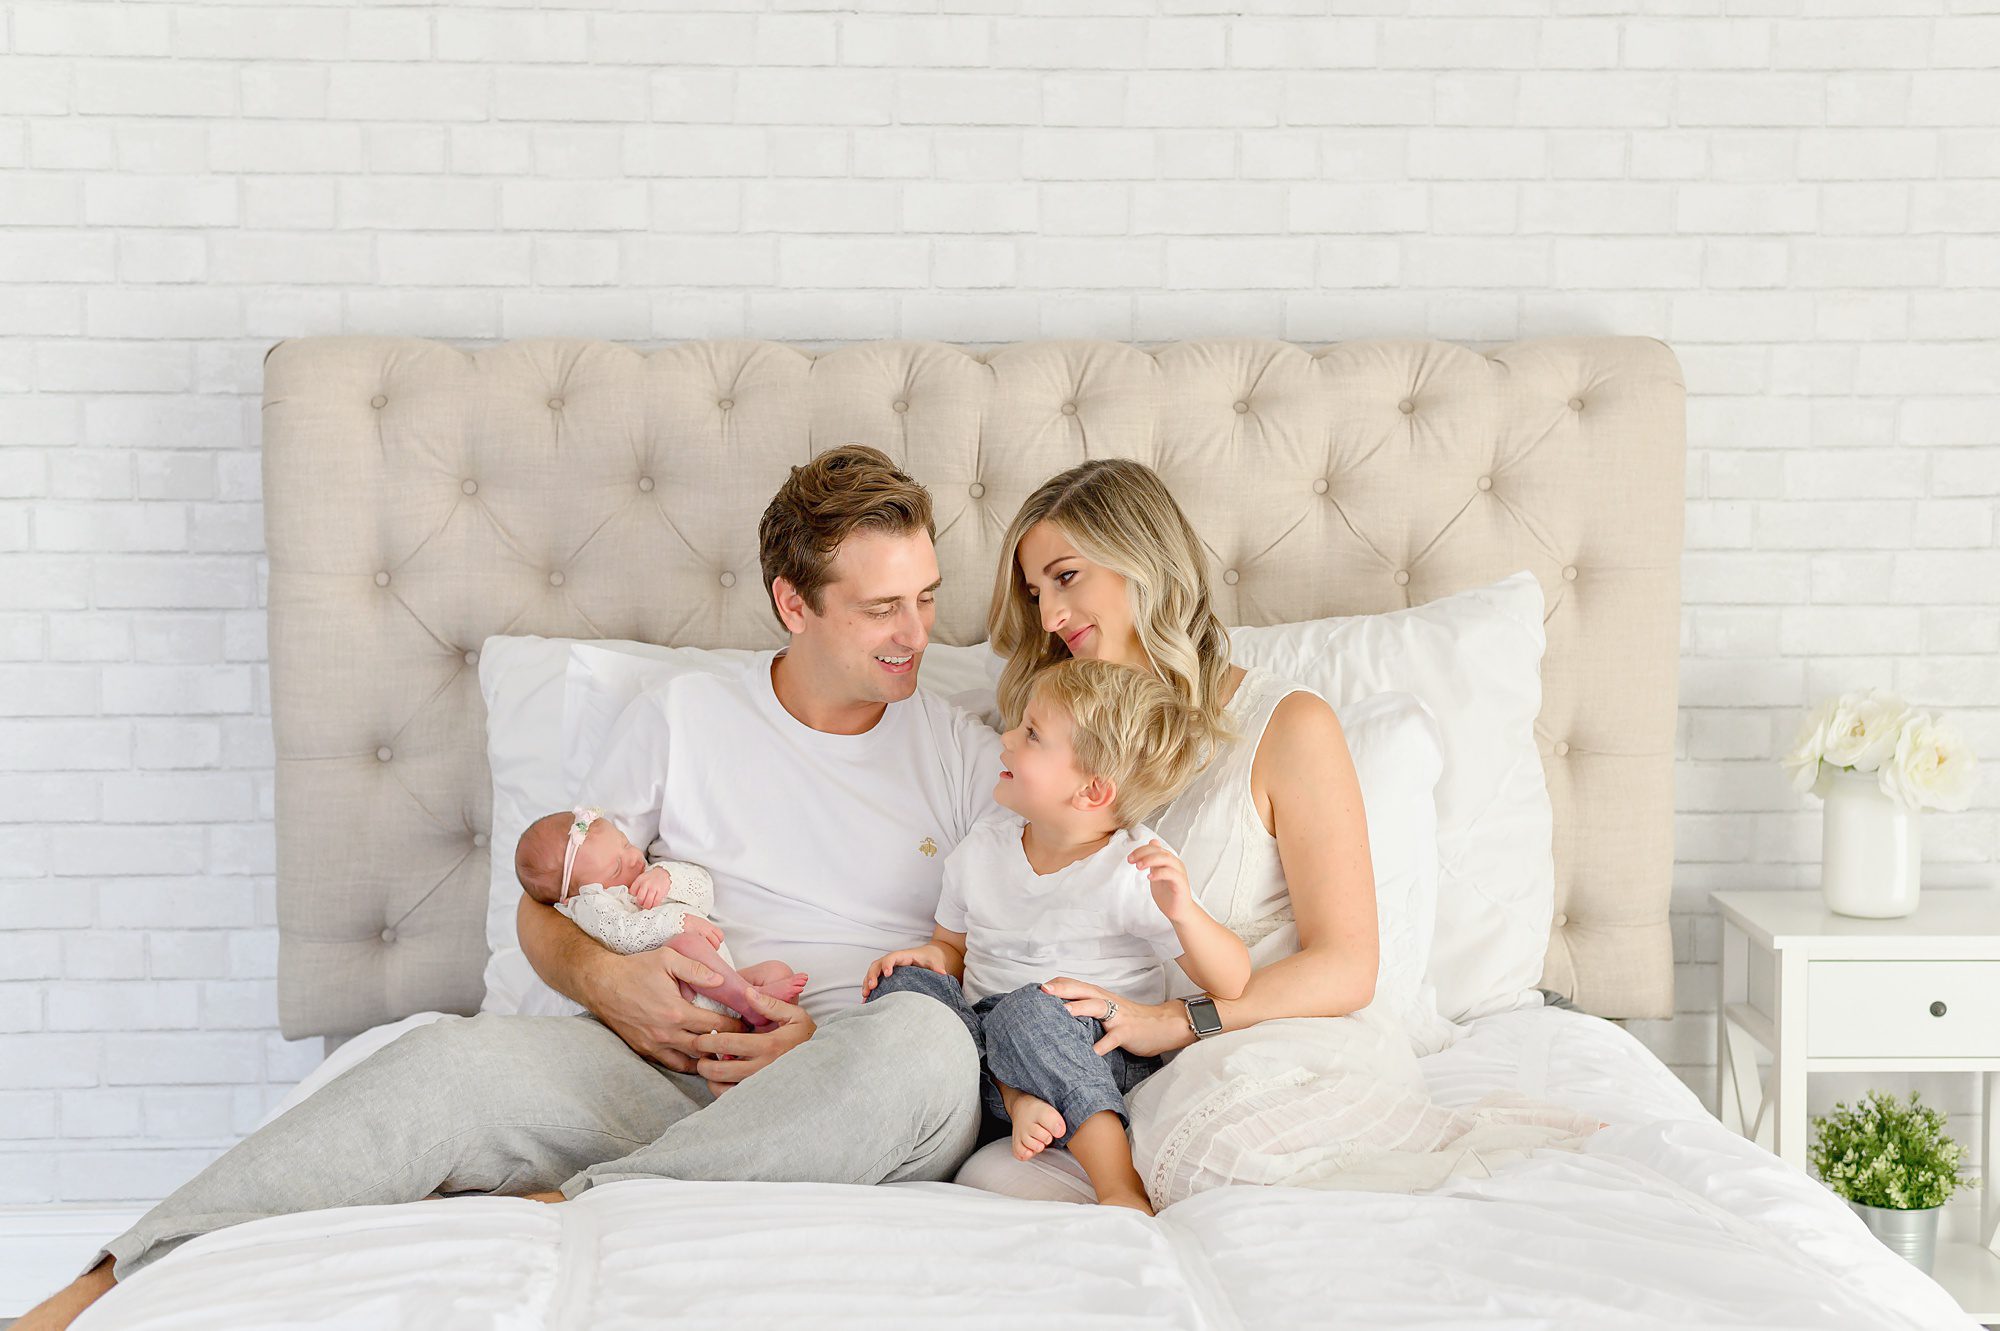 A young family of 4 with a new baby girl gets newborn portraits done in a bright white studio in Tampa Florida.